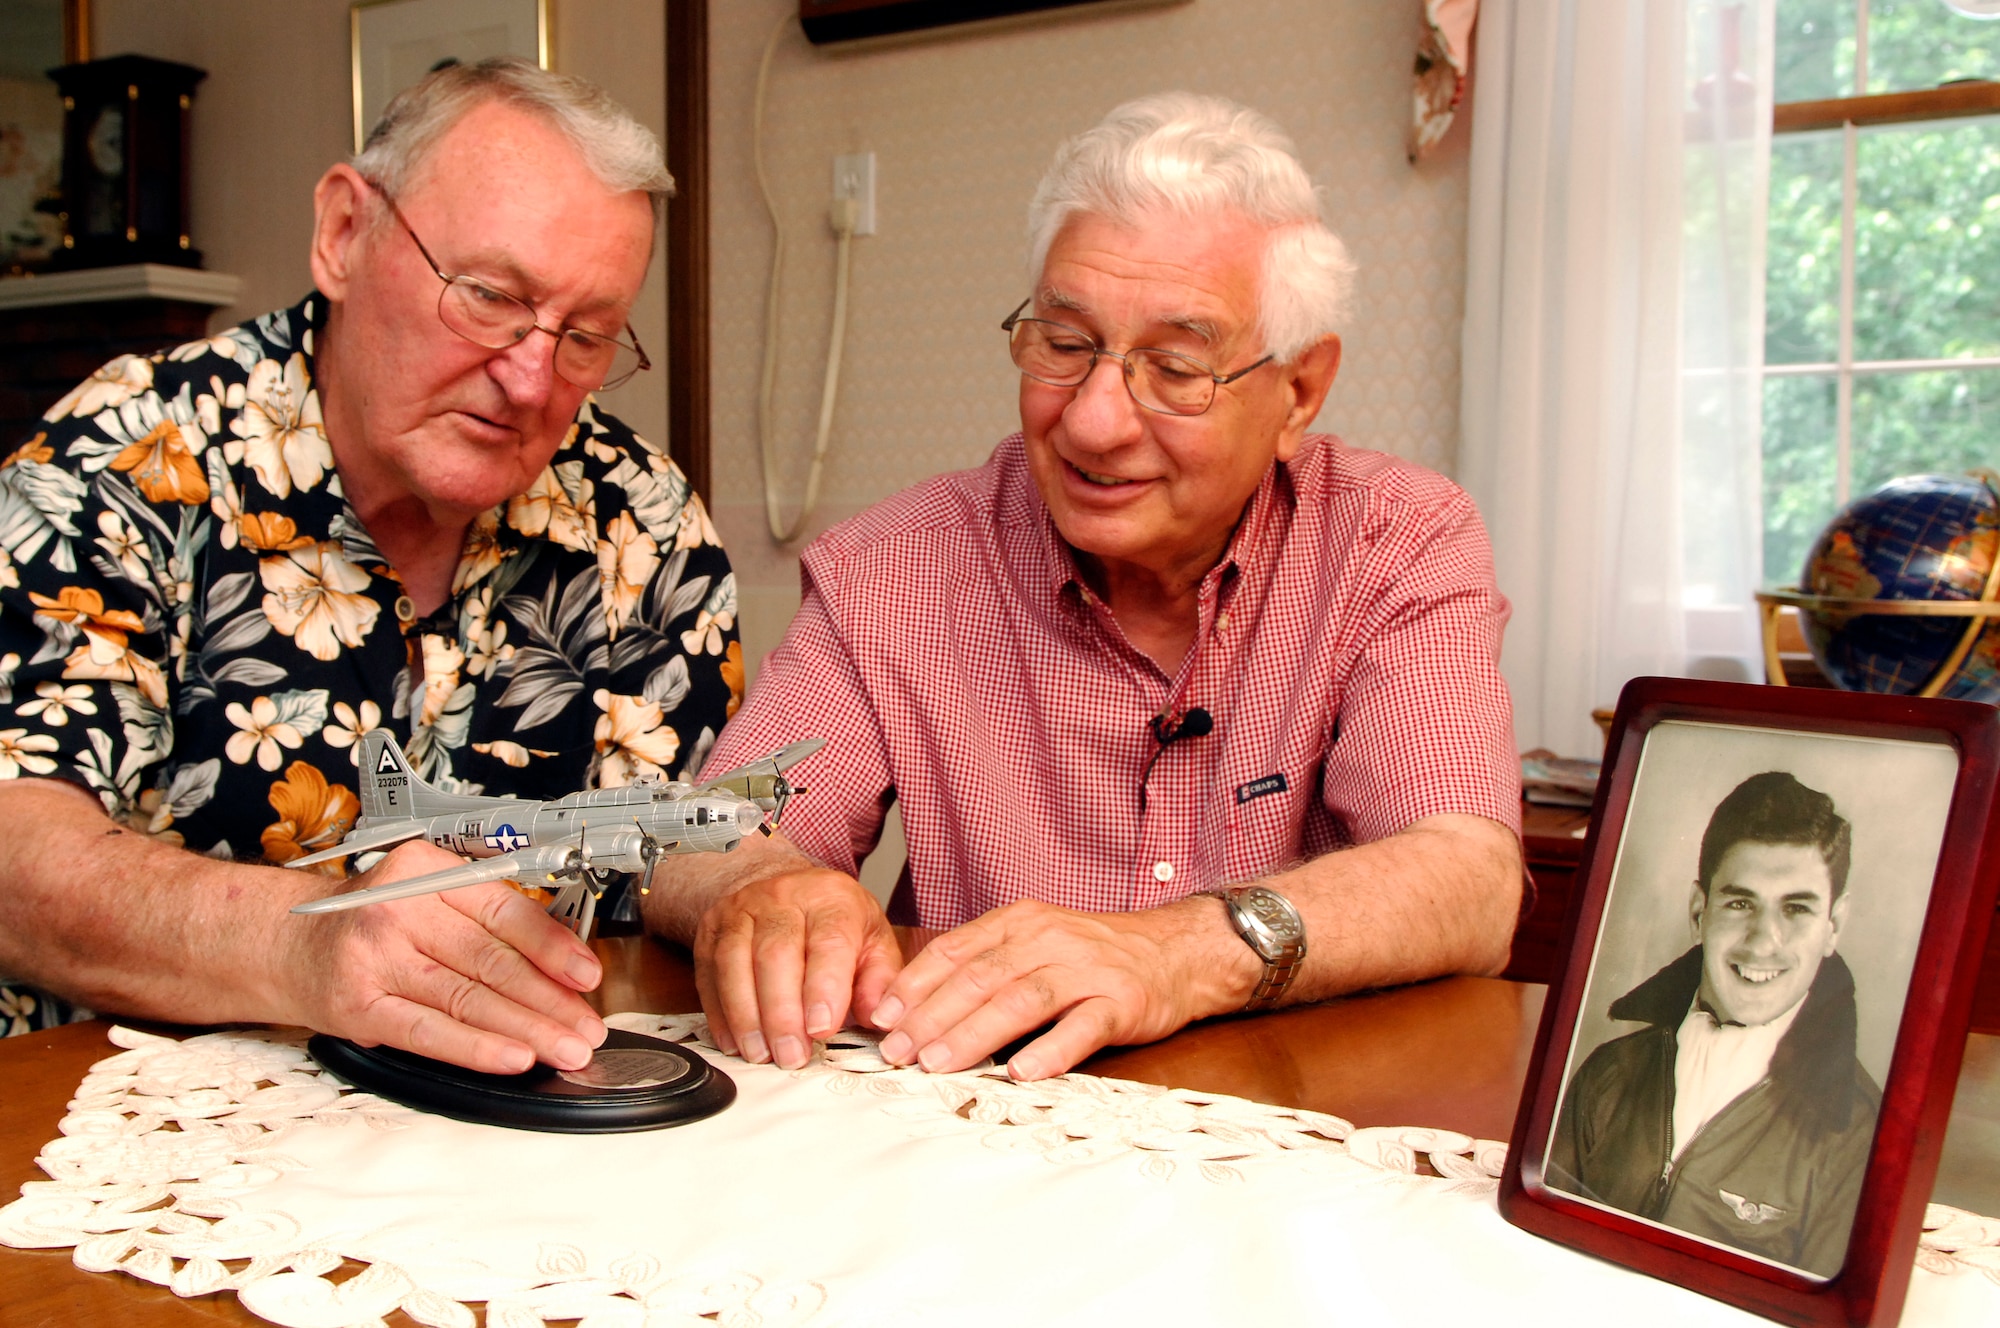 HANSCOM AFB, Mass. -- Tom Fahey Jr. and long-time friend Mike Modica reminisce about their days as B-17 gunners in the Army Air Corps during World War II. Both men were stationed in Italy with the 15th Air Force as staff sergeants serving on B-17 aircraft crews. Both Airmen also flew side-by-side with the 332nd Fighter Group of the Tuskegee Airmen. (U.S. Air Force photo by Mark Wyatt)
